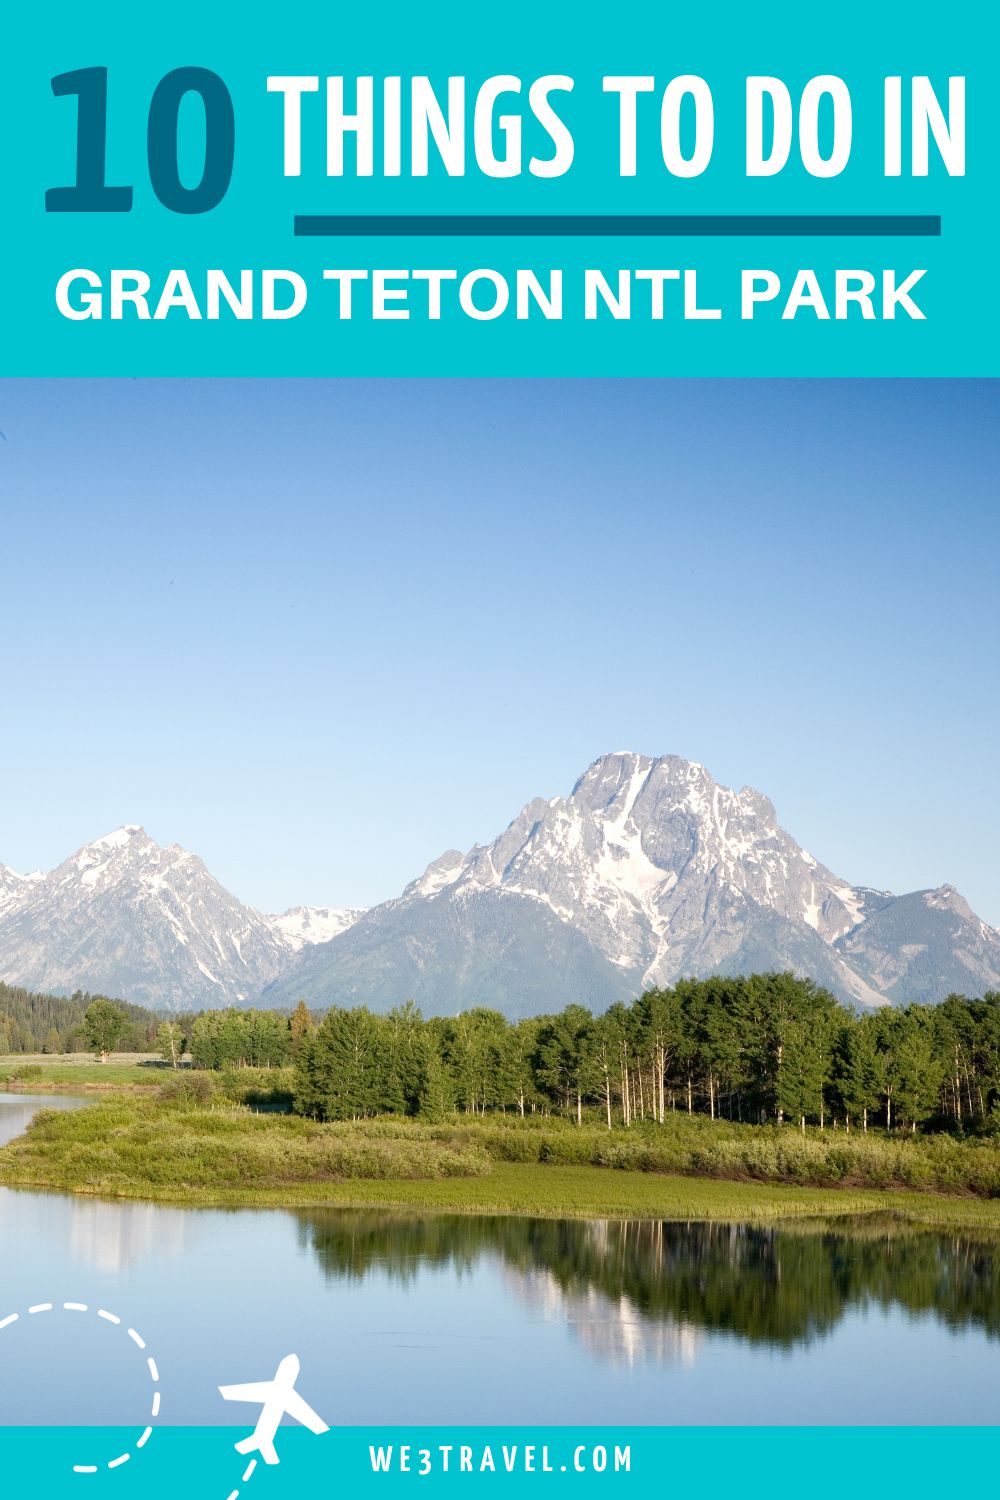 10 Things to do in Grand Teton National Park in Wyoming